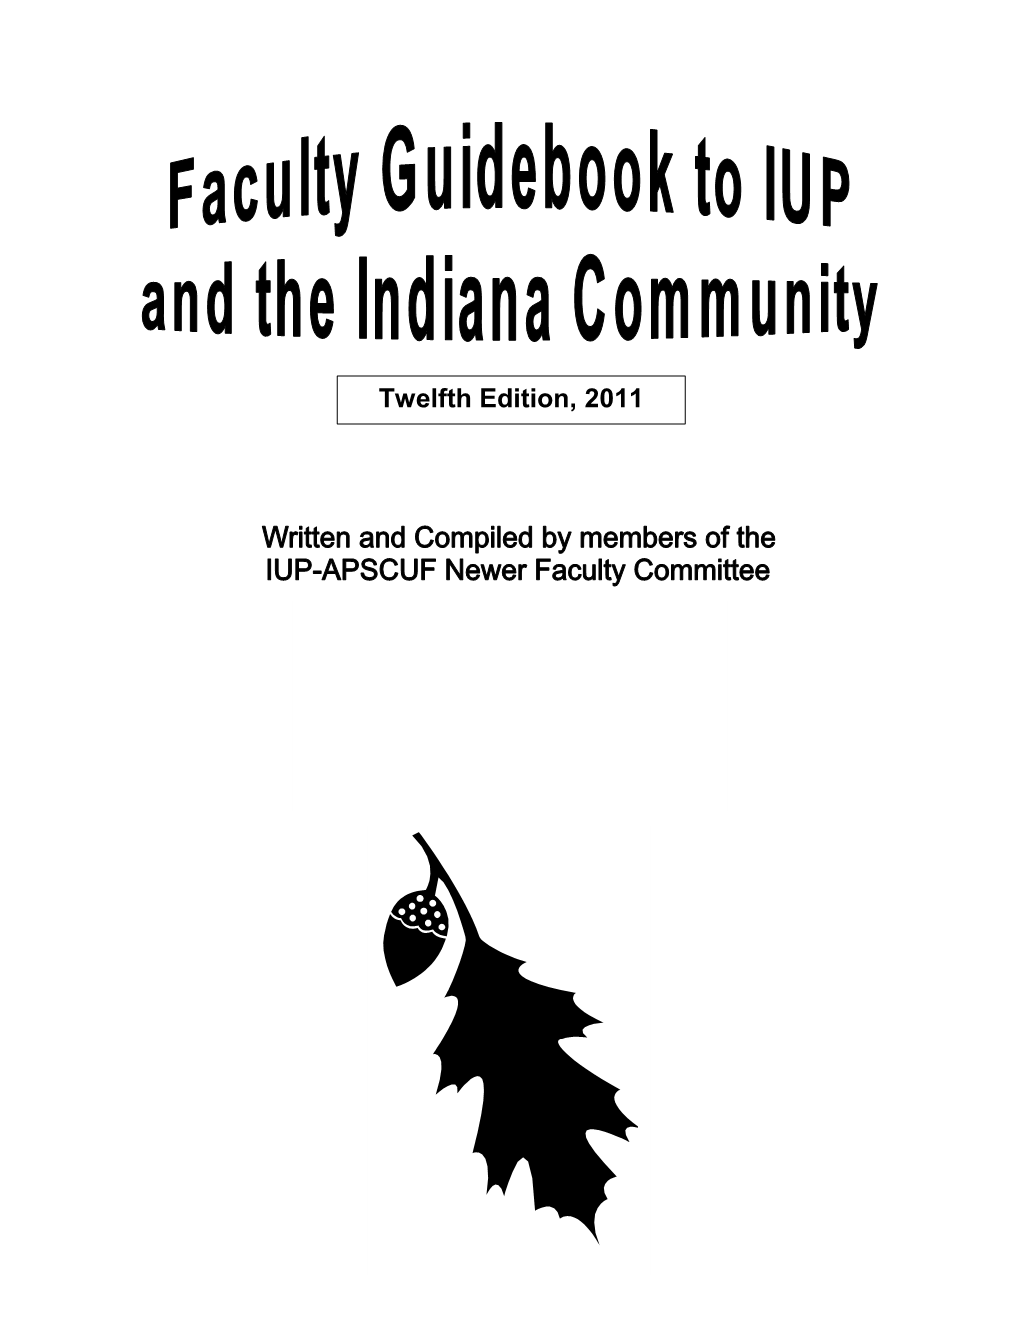 Faculty Guidebook to IUP and the Indiana Community